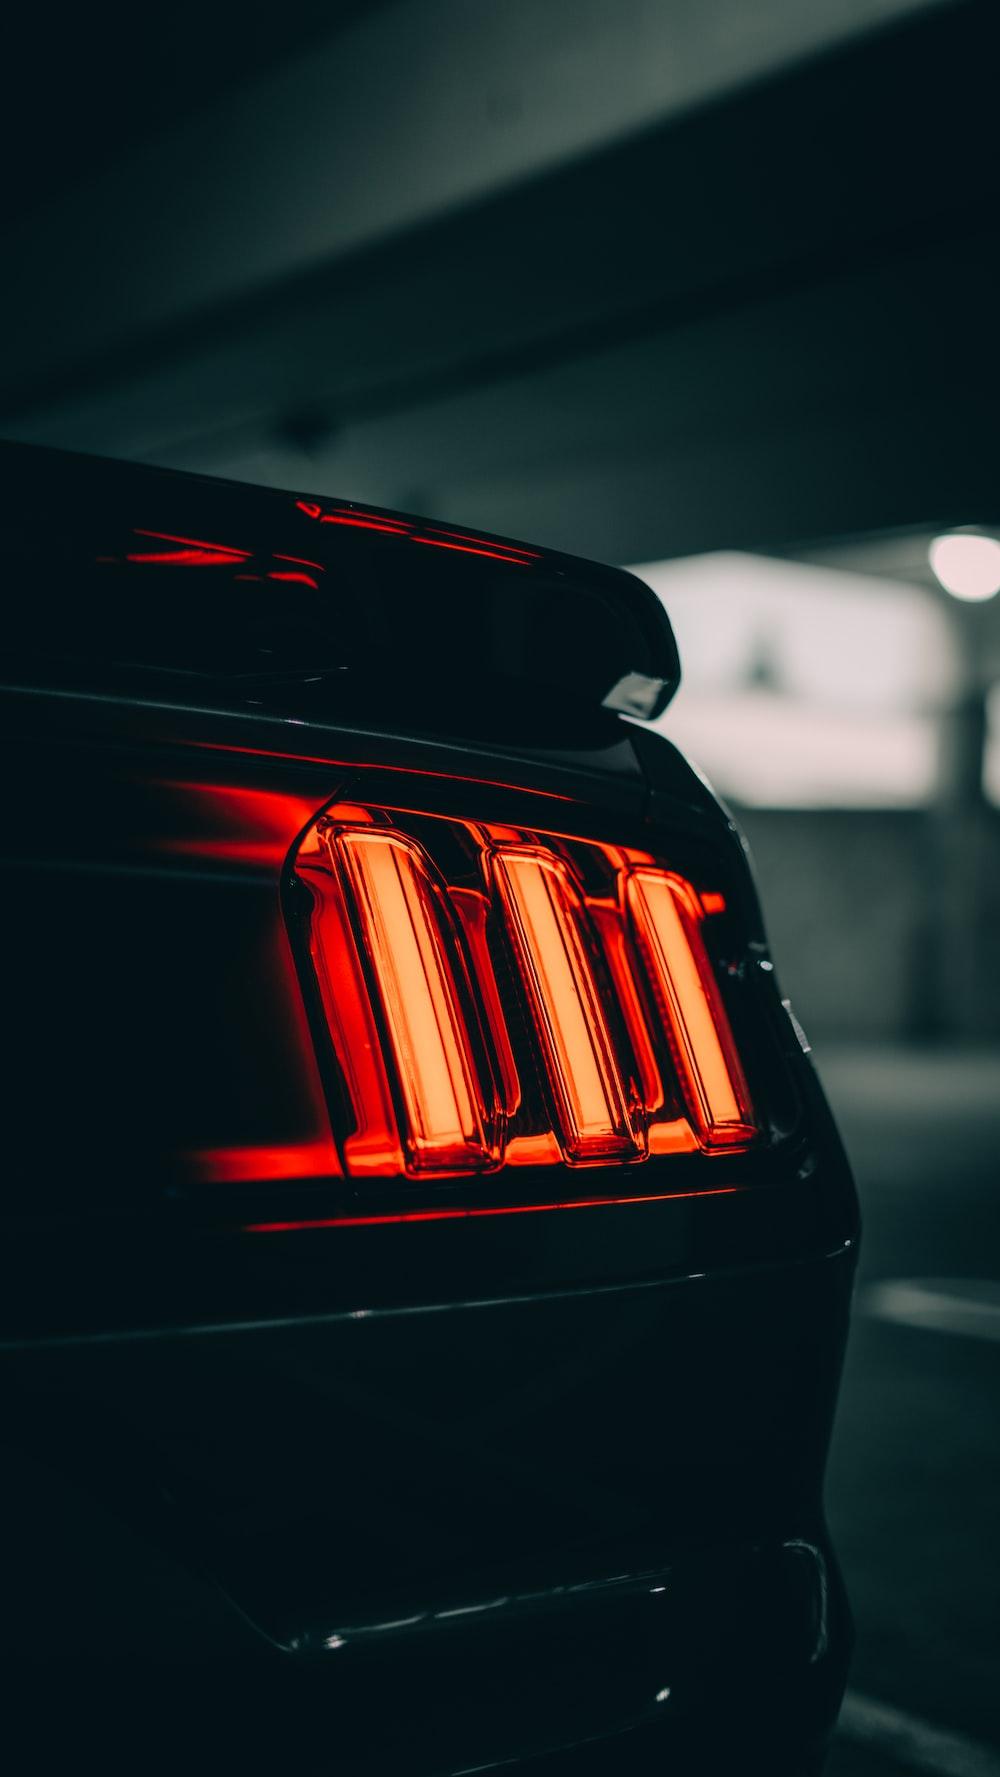 Mustang Wallpapers Free HD Download [500 HQ]